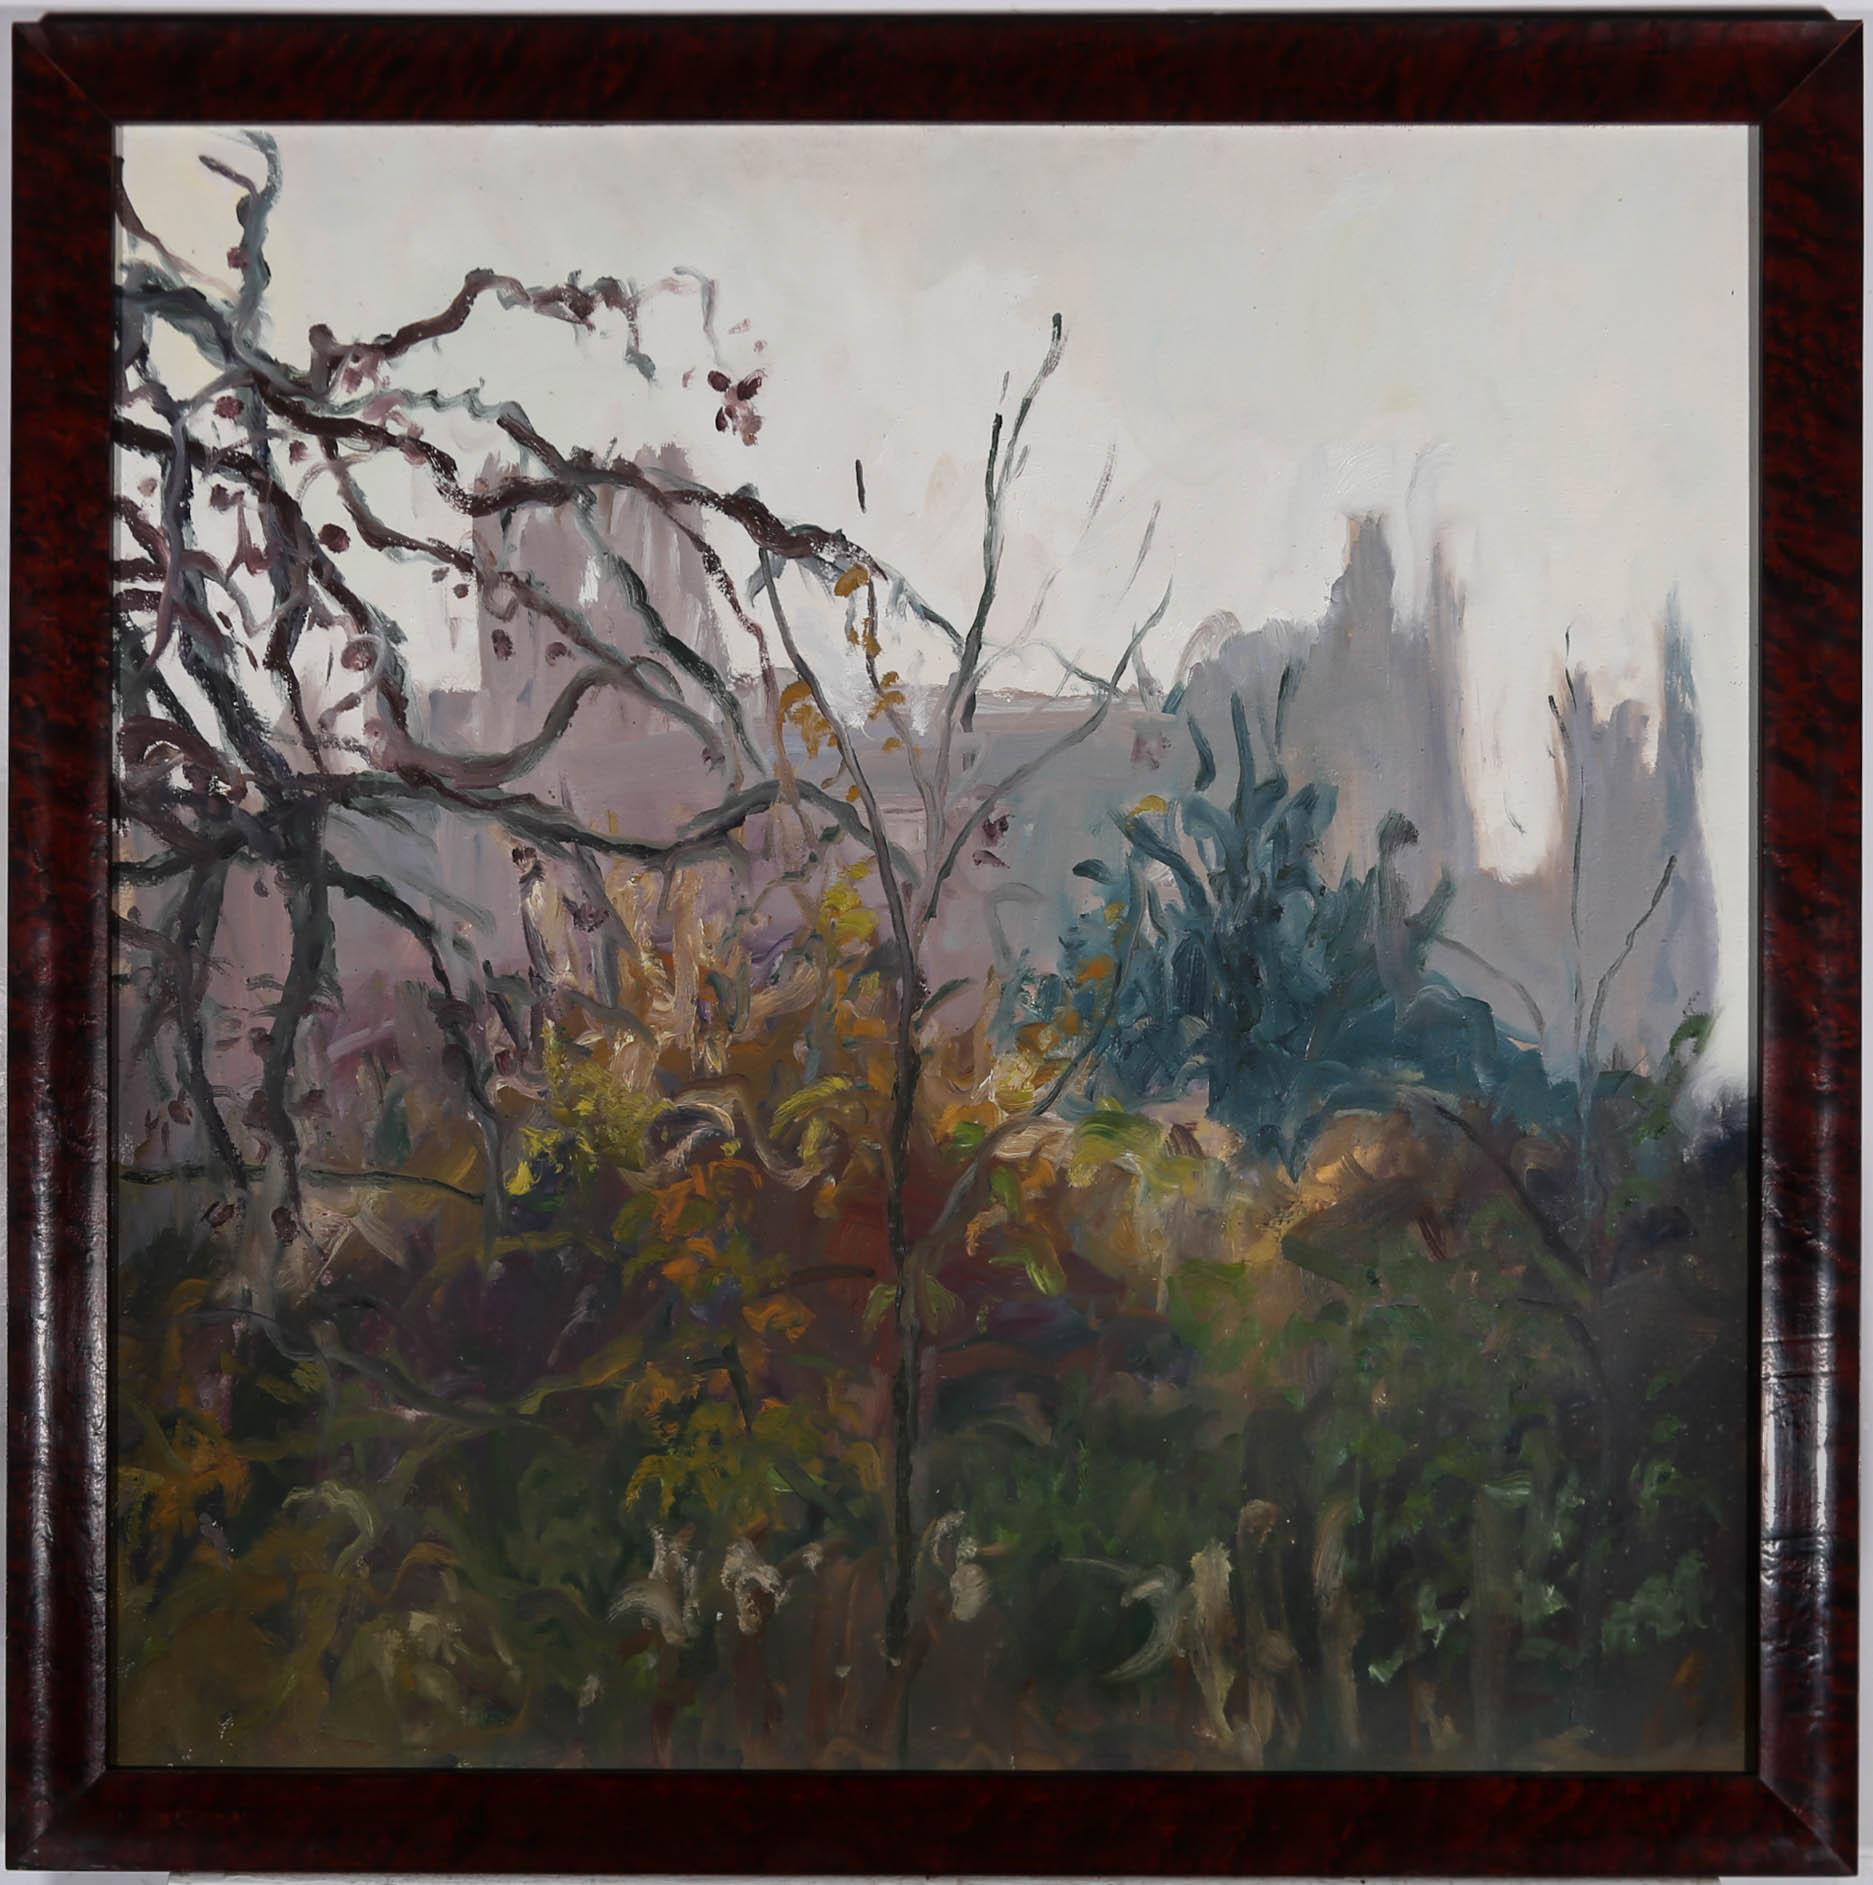 A wonderful impressionistic scene by Belgium artist Max Servais (1904-1990), depicting an obscured cathedral through wiry undergrowth and winter trees. Elegantly presented in a highly polished, veneer frame. Signed with initials verso. On board. 
